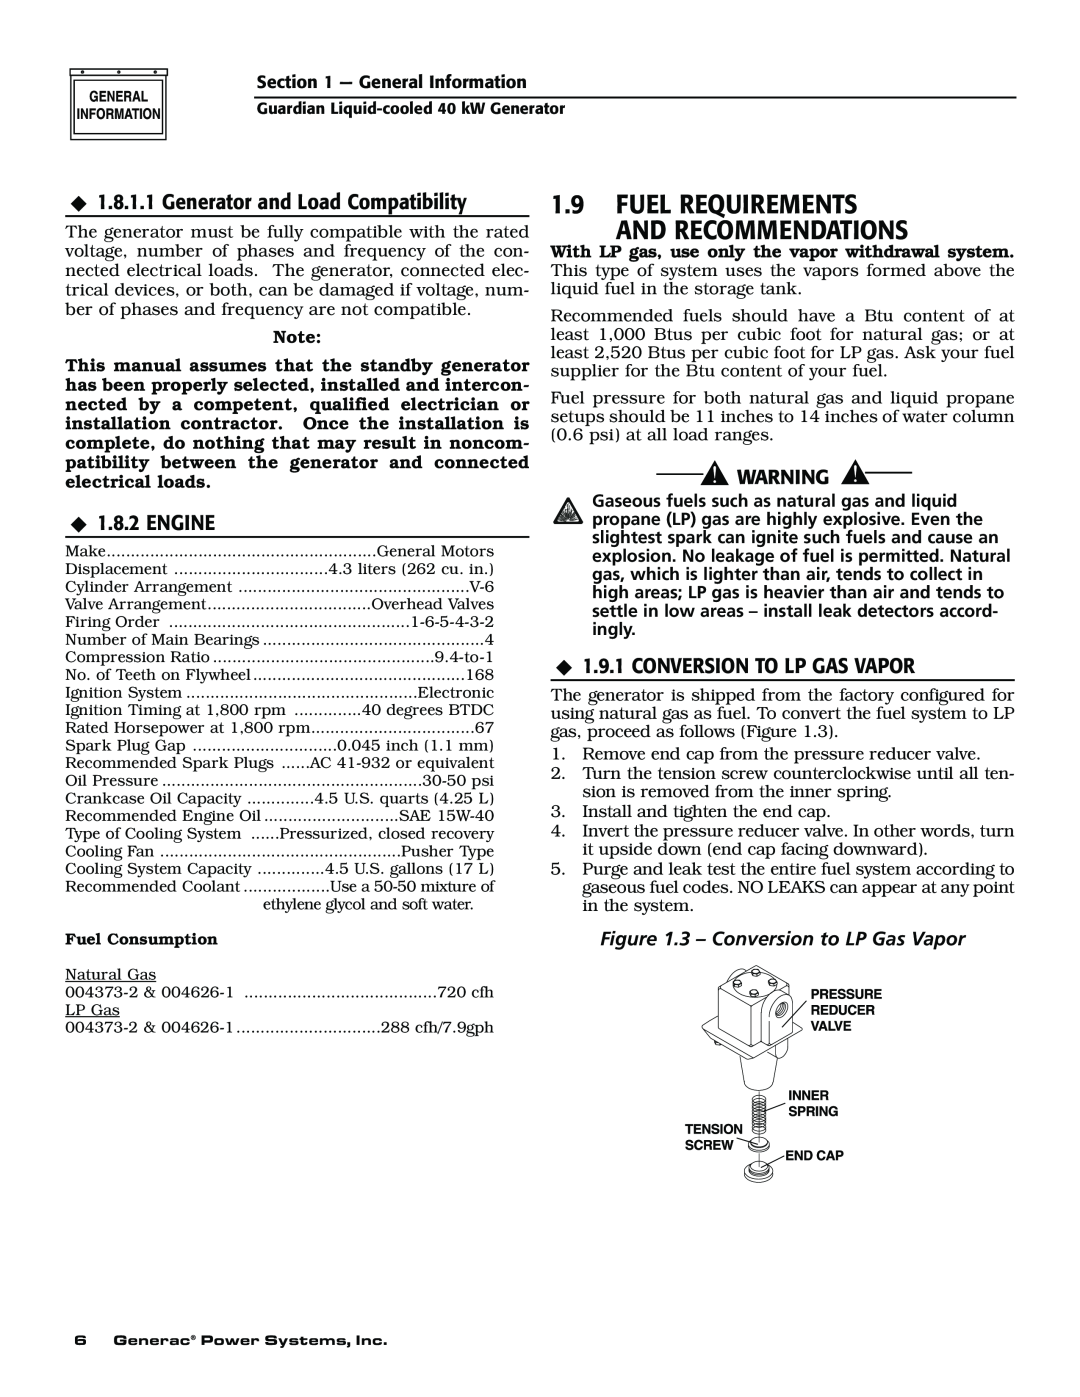 Generac 004373-2, 004626-1 owner manual Fuel Requirements And Recommendations, Generator and Load Compatibility, Engine 